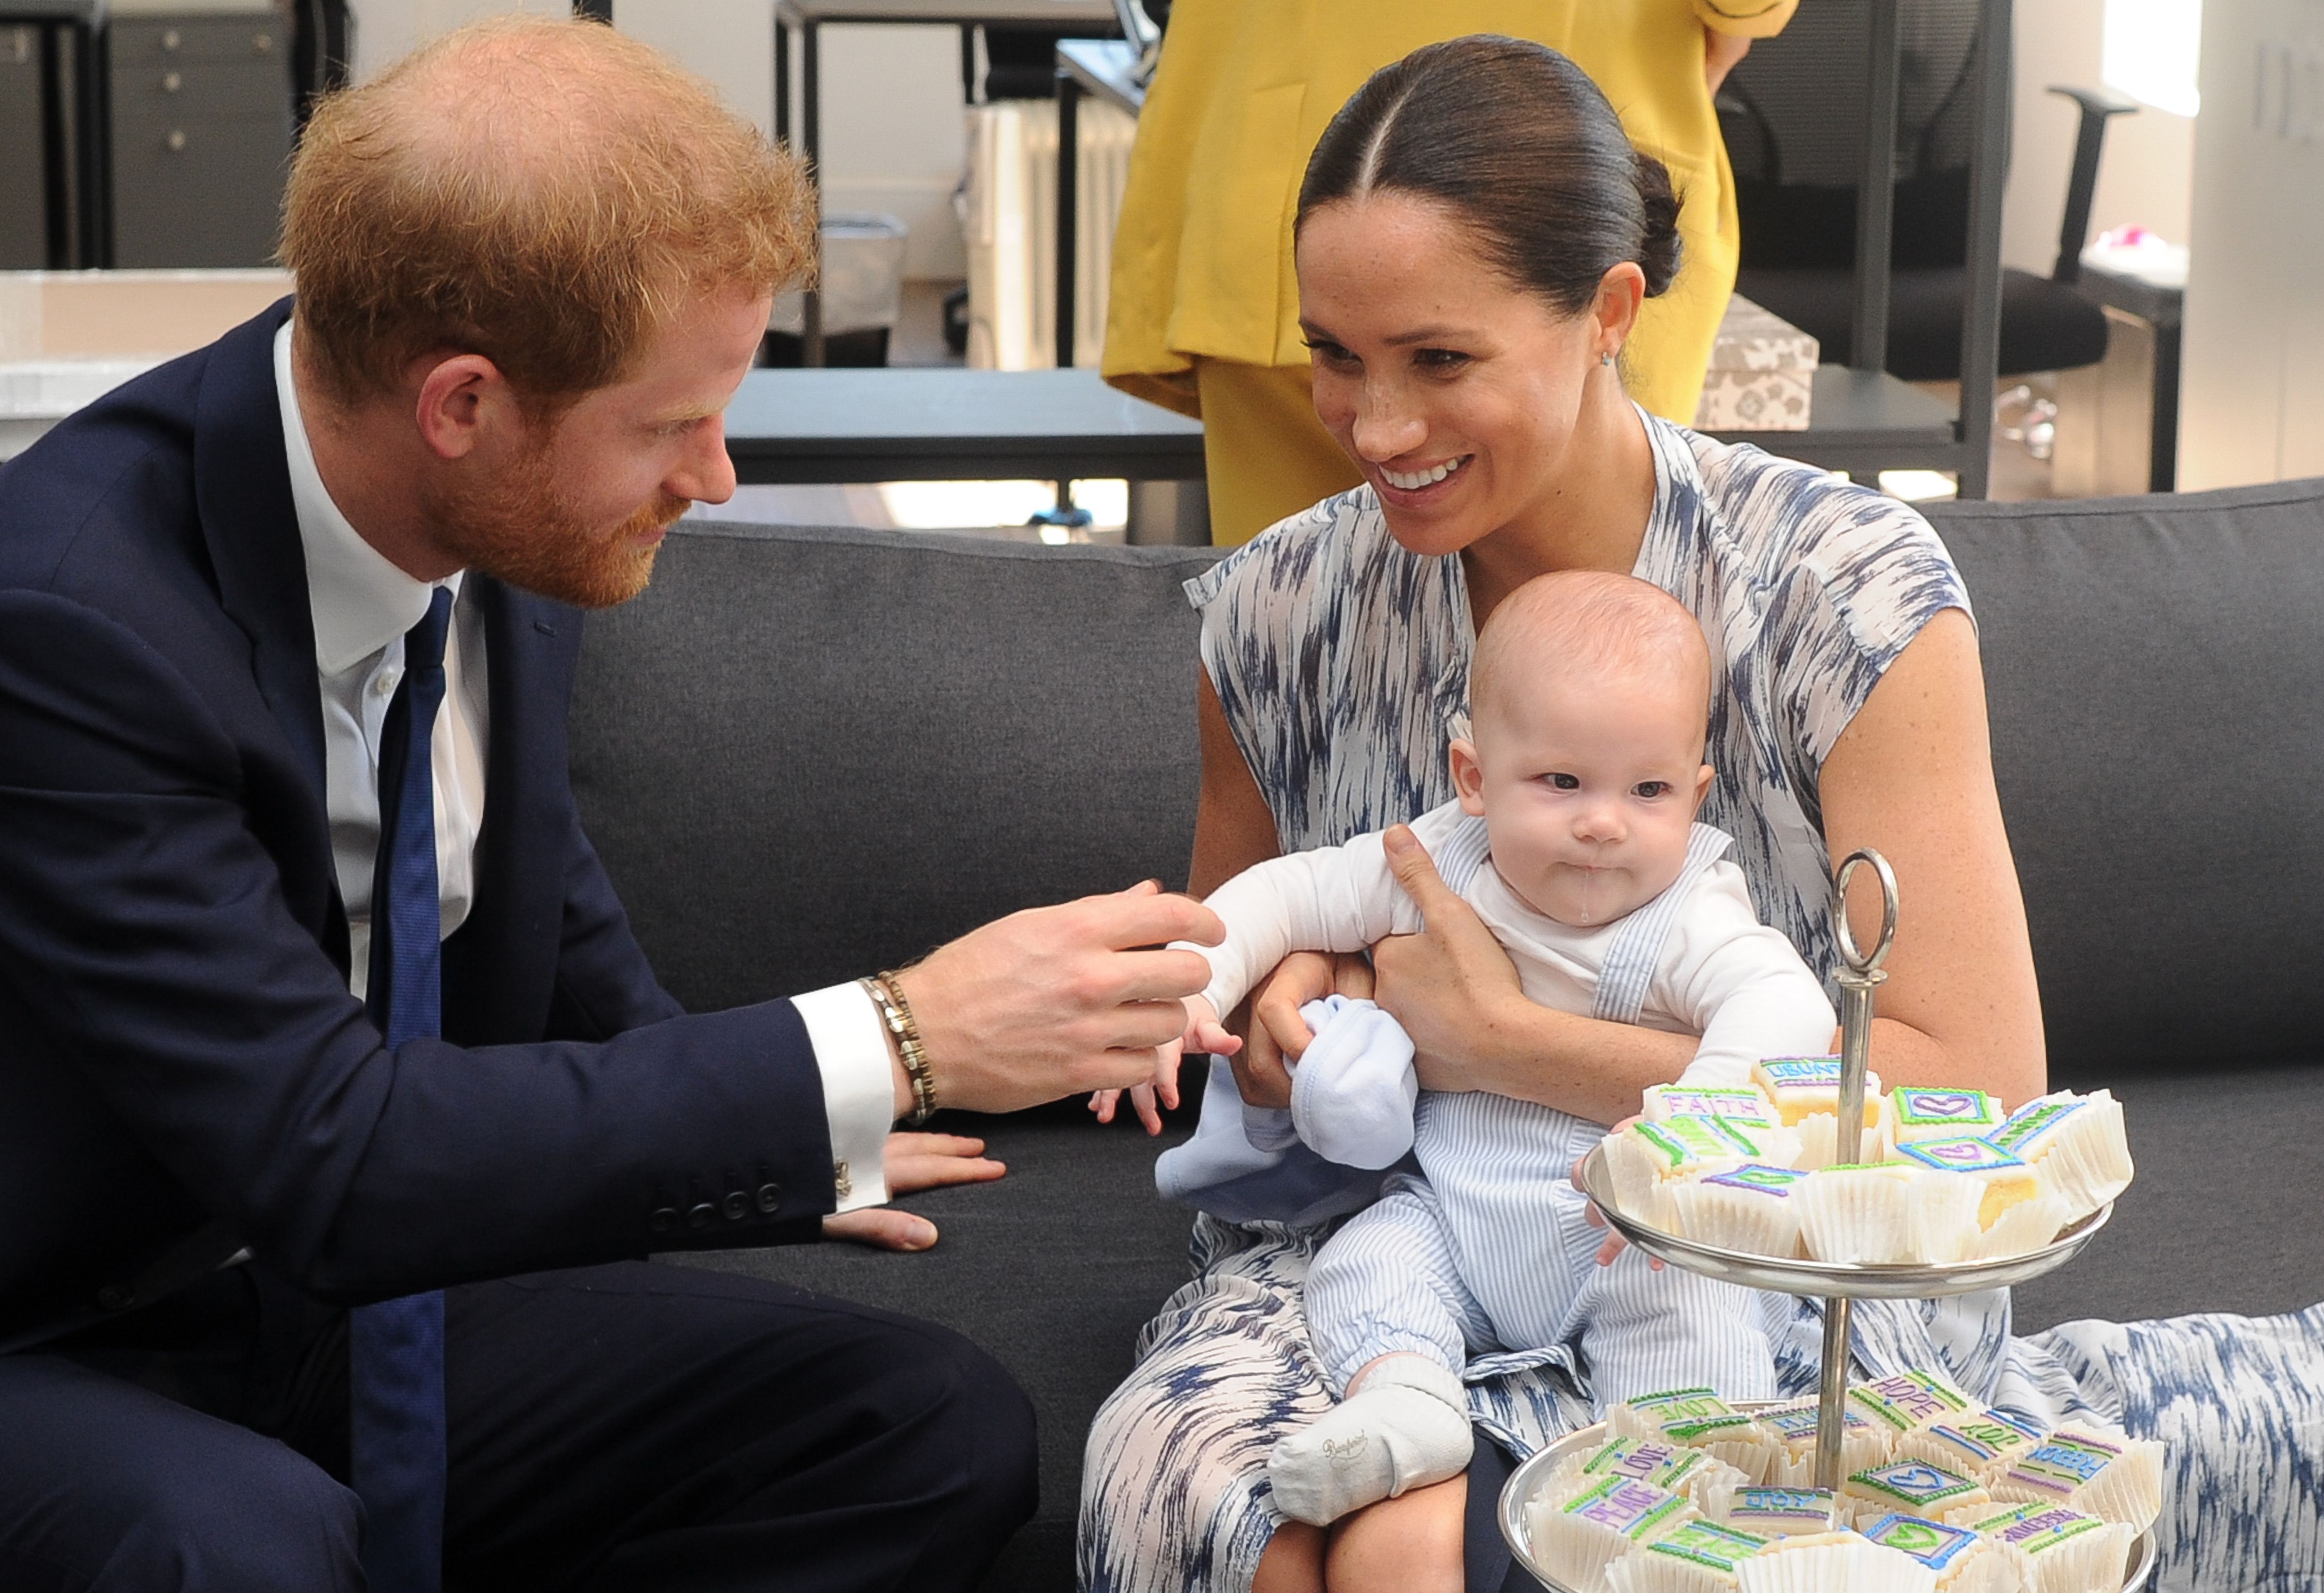 Duke and Duchess of Sussex, Prince Harry and his wife Meghan Markle with their son Archie at the Tutu Legacy Foundation on September 25, 2019 in Cape Town, South Africa. | Source: Getty Images